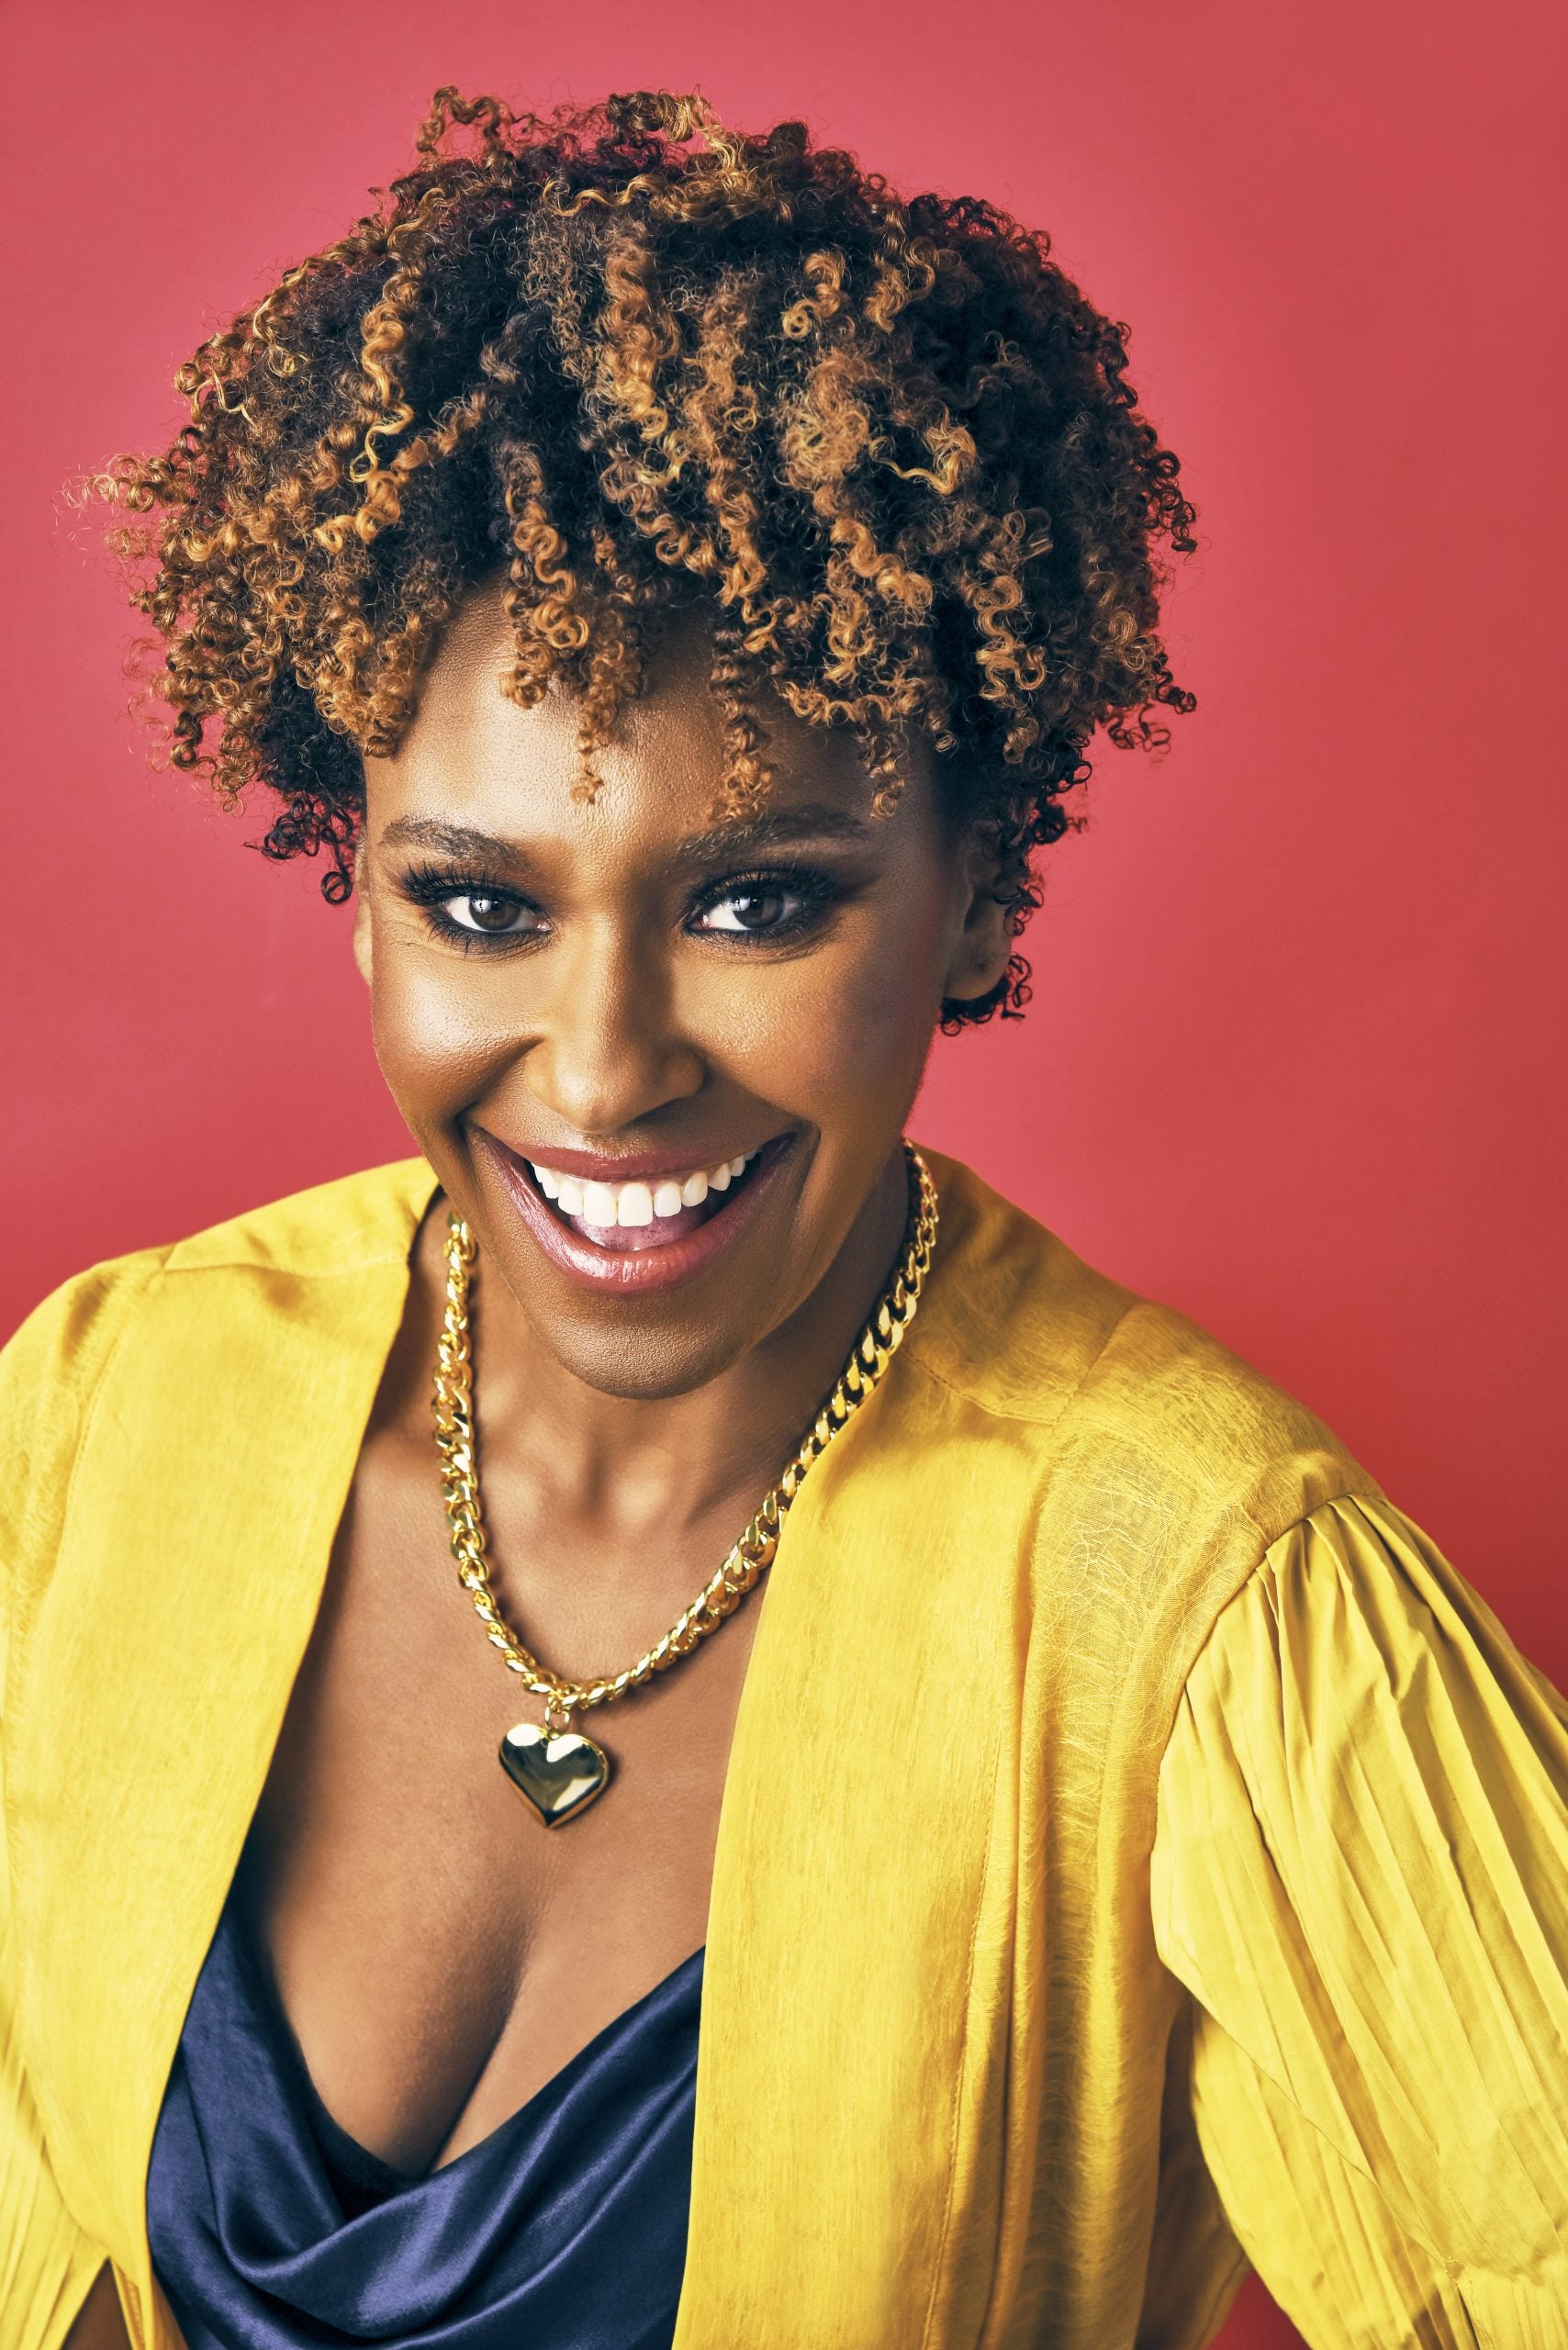 Ryan Michelle Bathé Gets Real About Juggling Family And The Hollywood Hustle